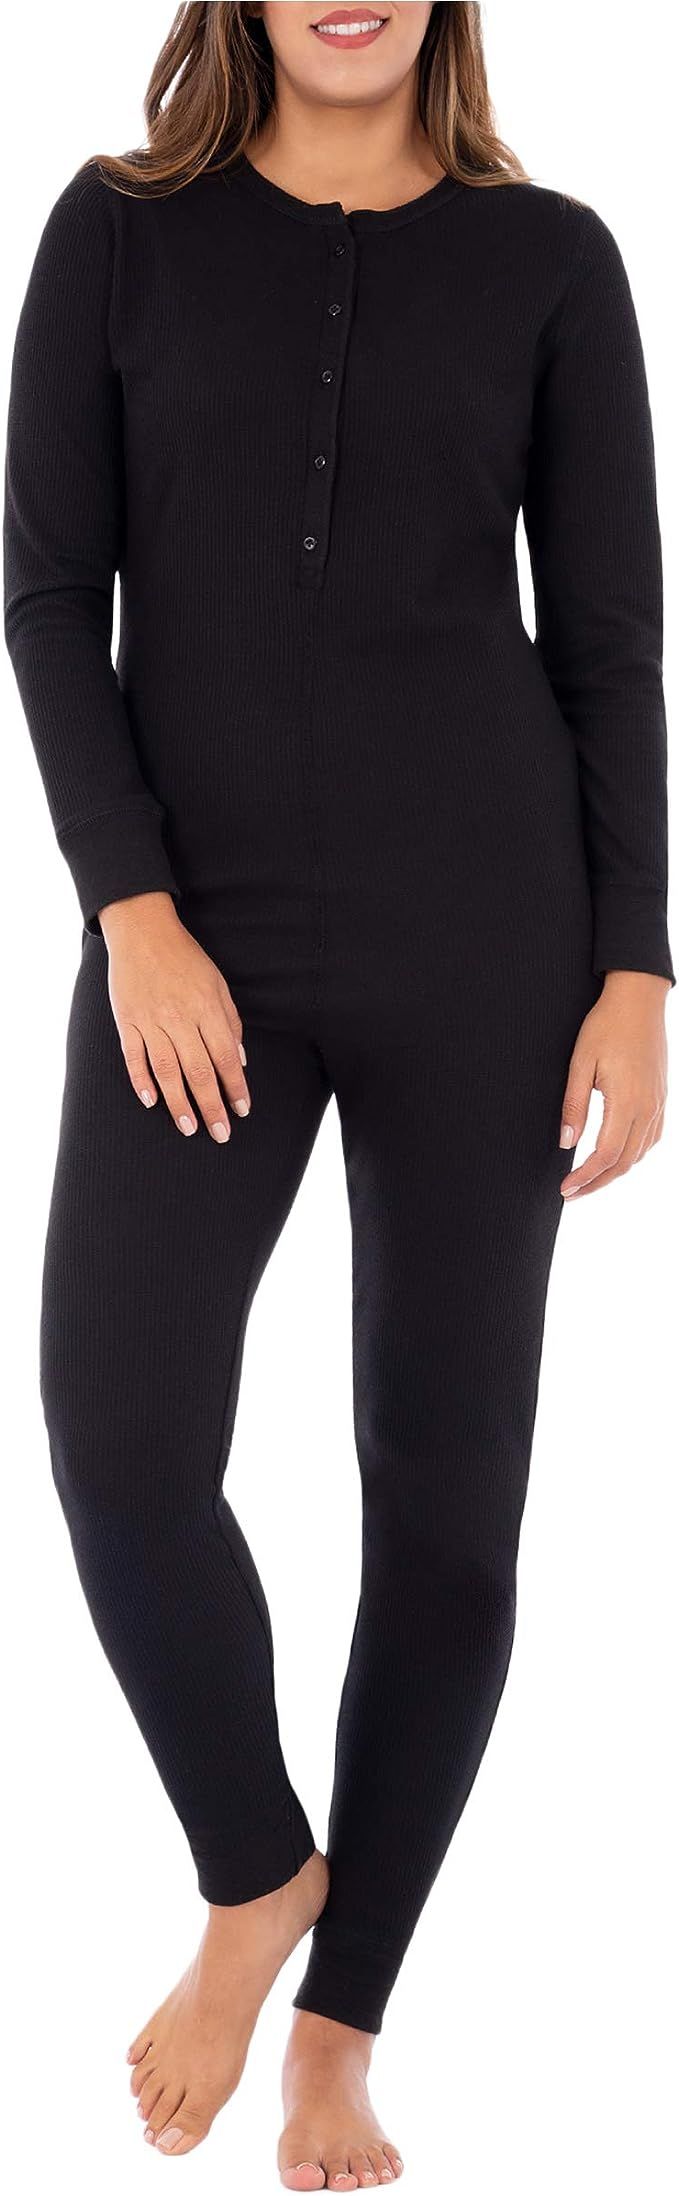 Fruit of the Loom womens Micro Waffle Premium Thermal Union Suit | Amazon (US)